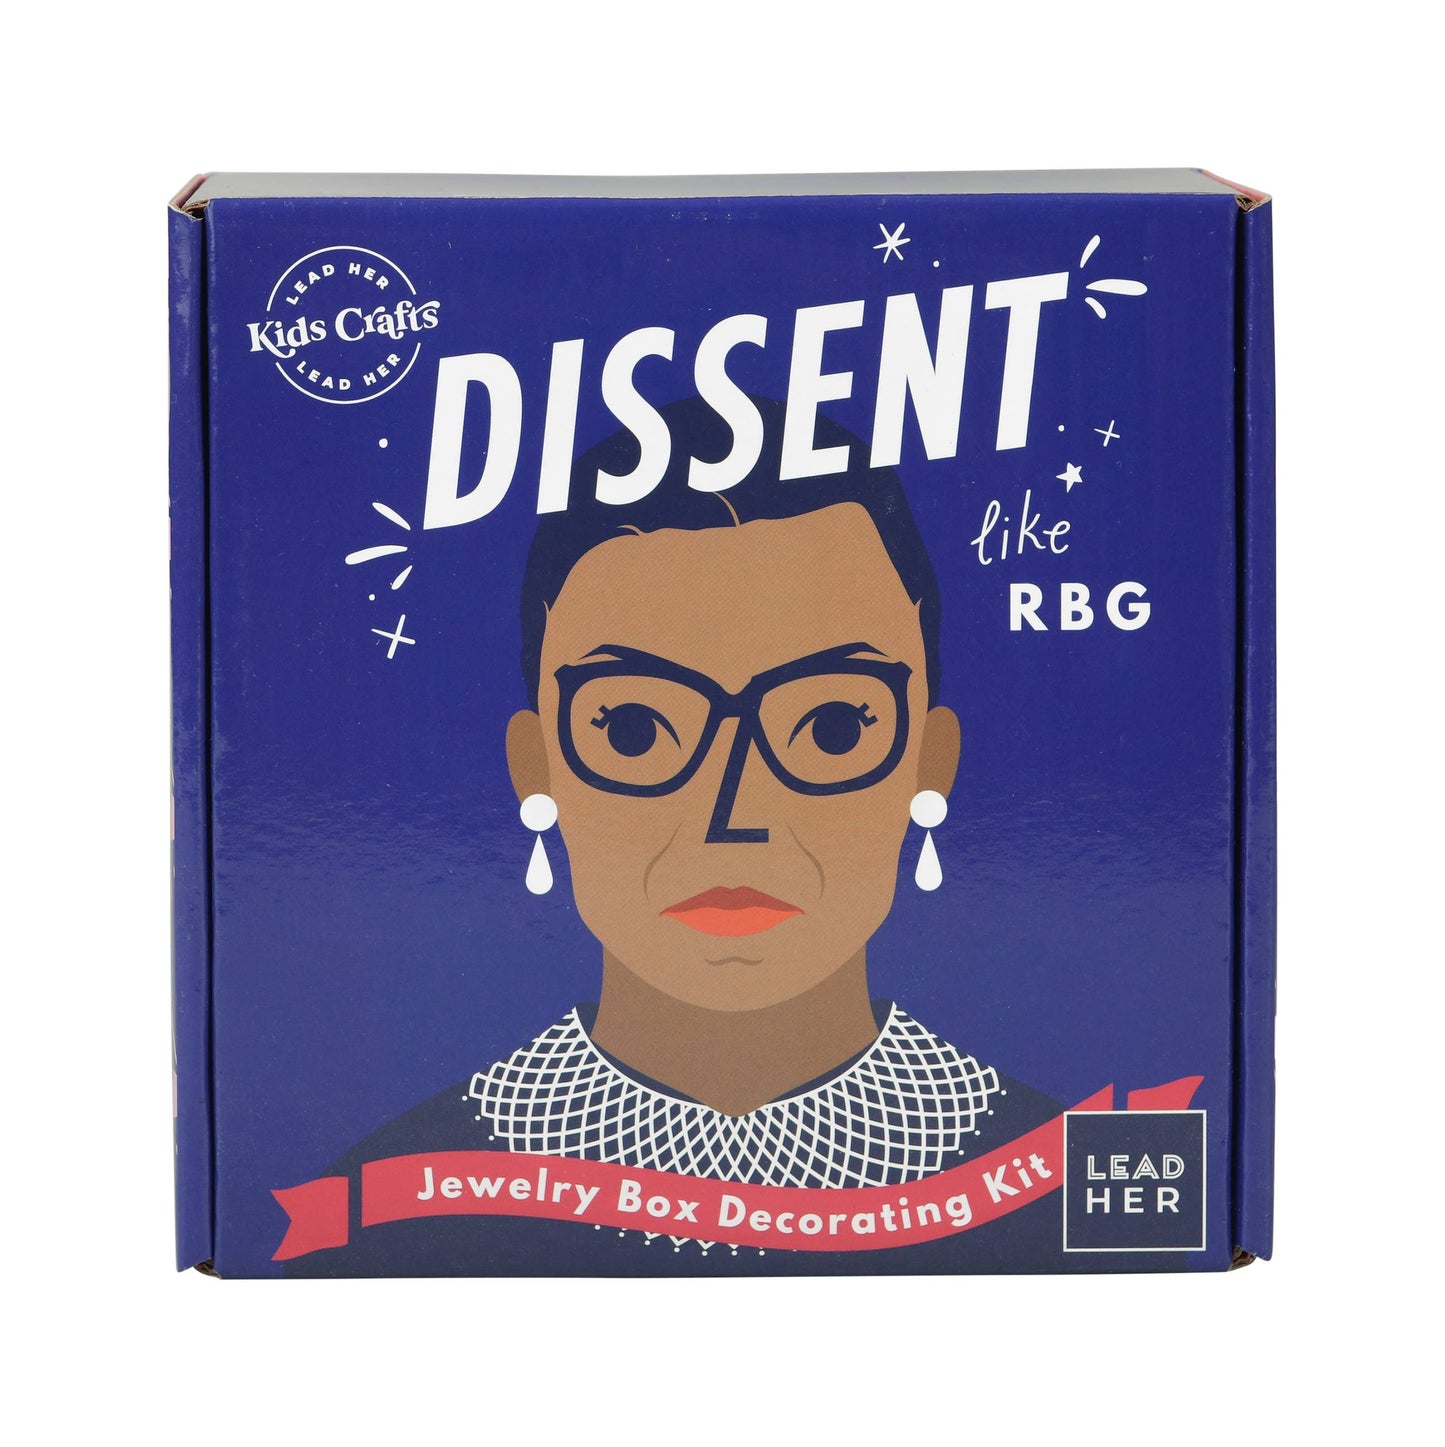 The front of the box packaging for the “DISSENT like RBG” jewelry box decorating kit.